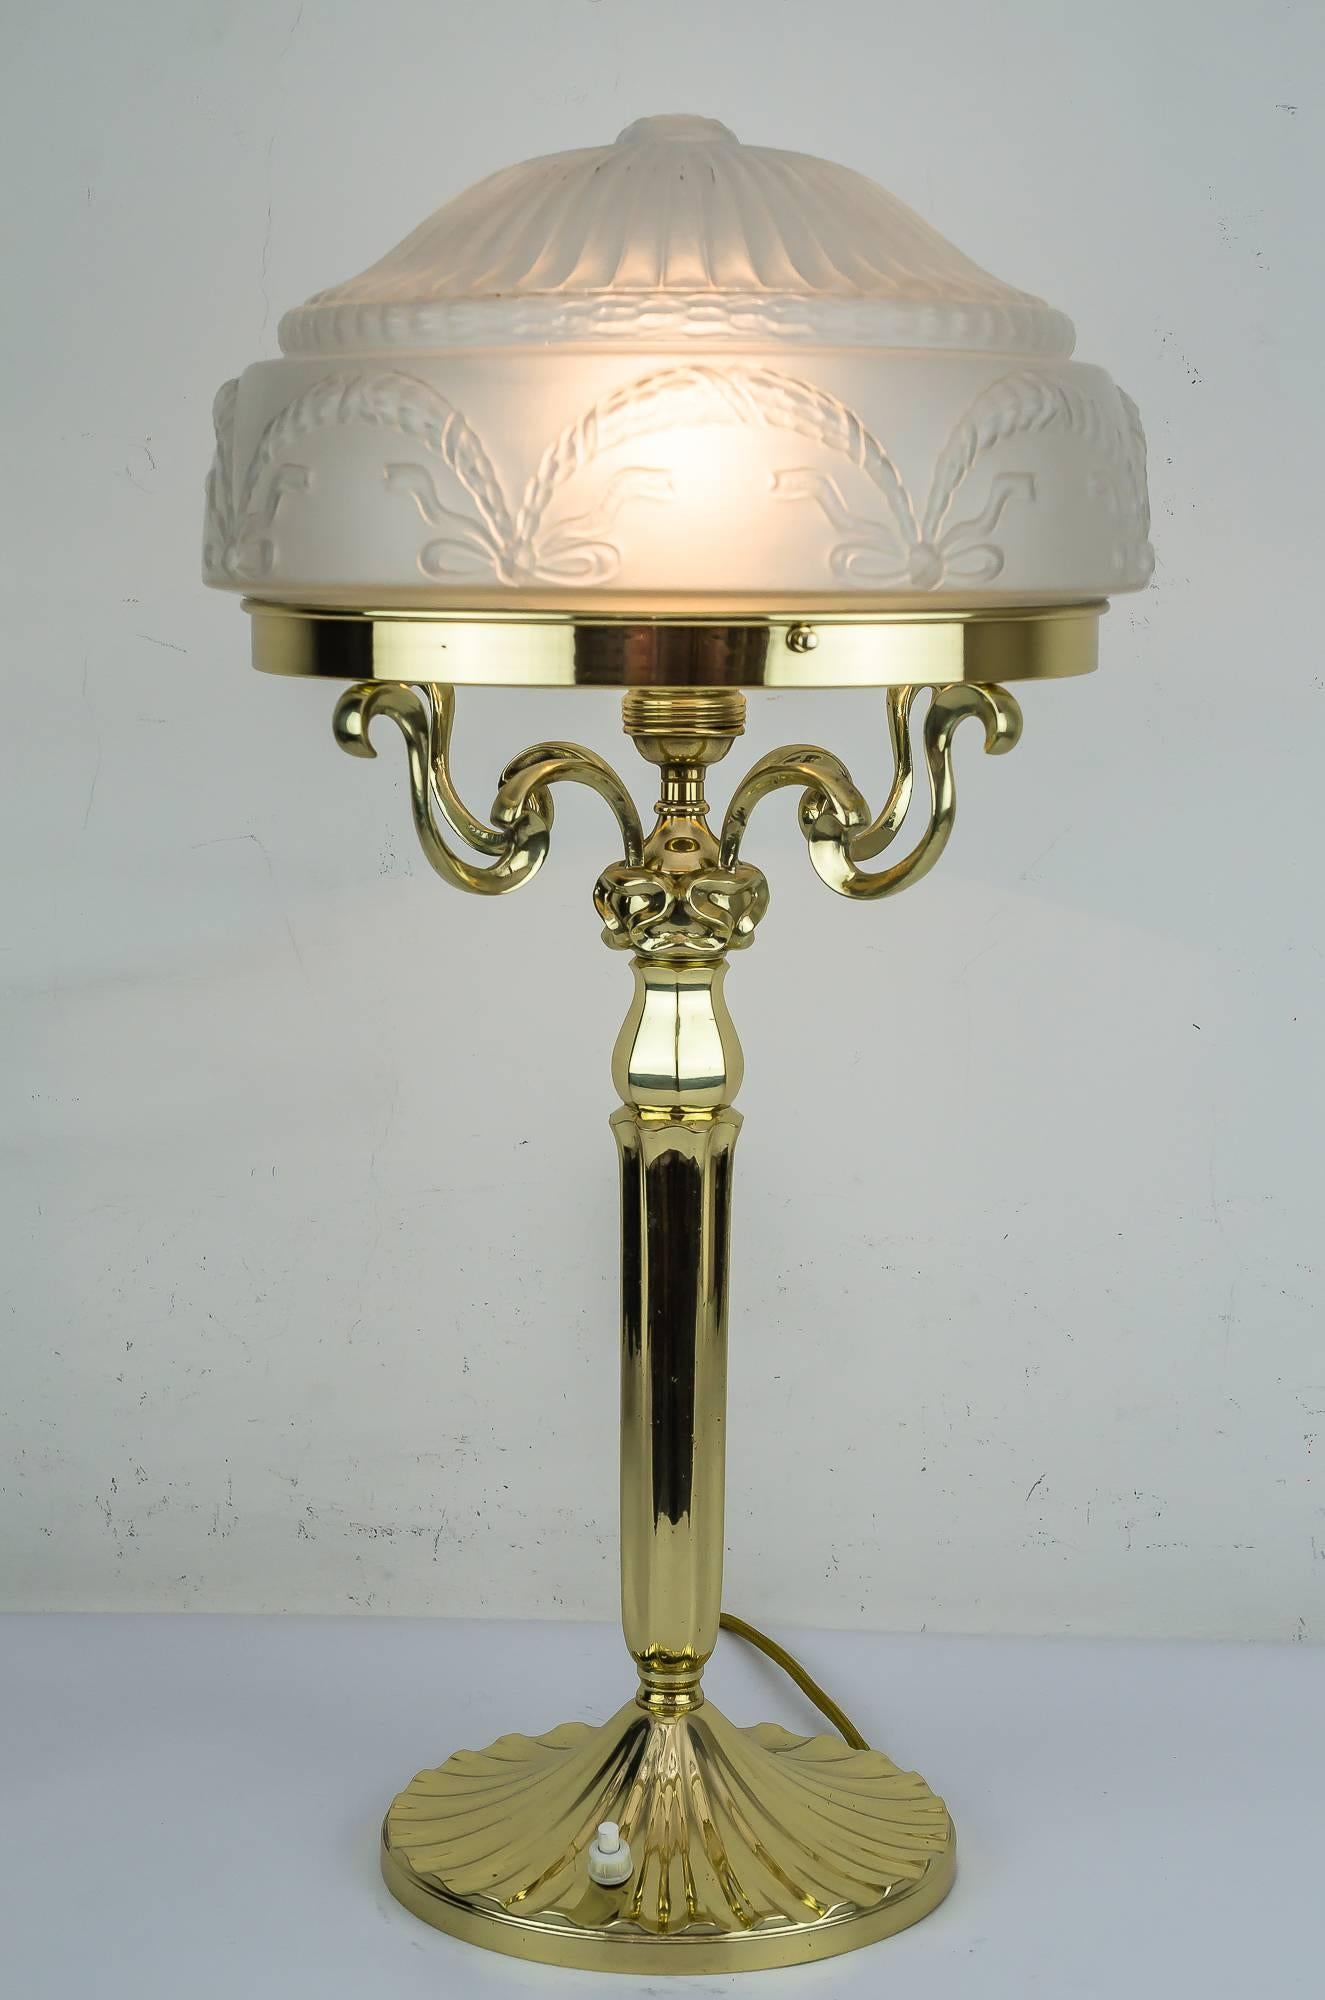 Jugendst table lamp, circa 1908
Polished and stove enameled.